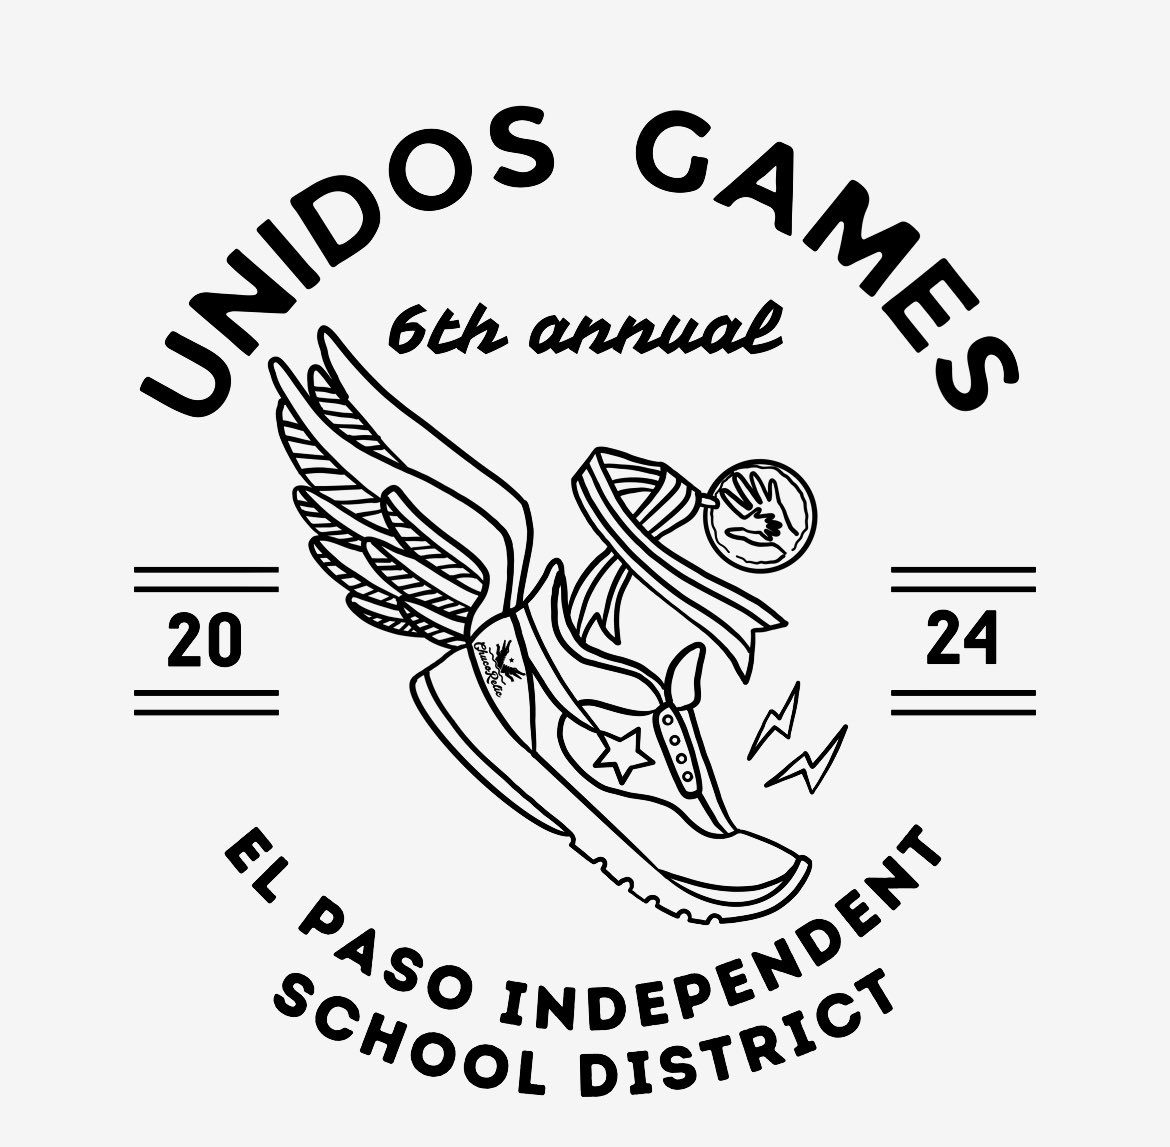 Can’t wait for our second try at Unidos 24! May 1 elementary and May 2 secondary … shall we say, rain or shine? 🙈🙊🙉 See you there! 👩🏻‍🦽‍➡️👨🏽‍🦼‍➡️🏃🏻‍♂️🏃🏻‍♀️ @ELPASO_ISD @peterpiper_ep @ProperPrintshop @FoodCityEP @ChucoRelic